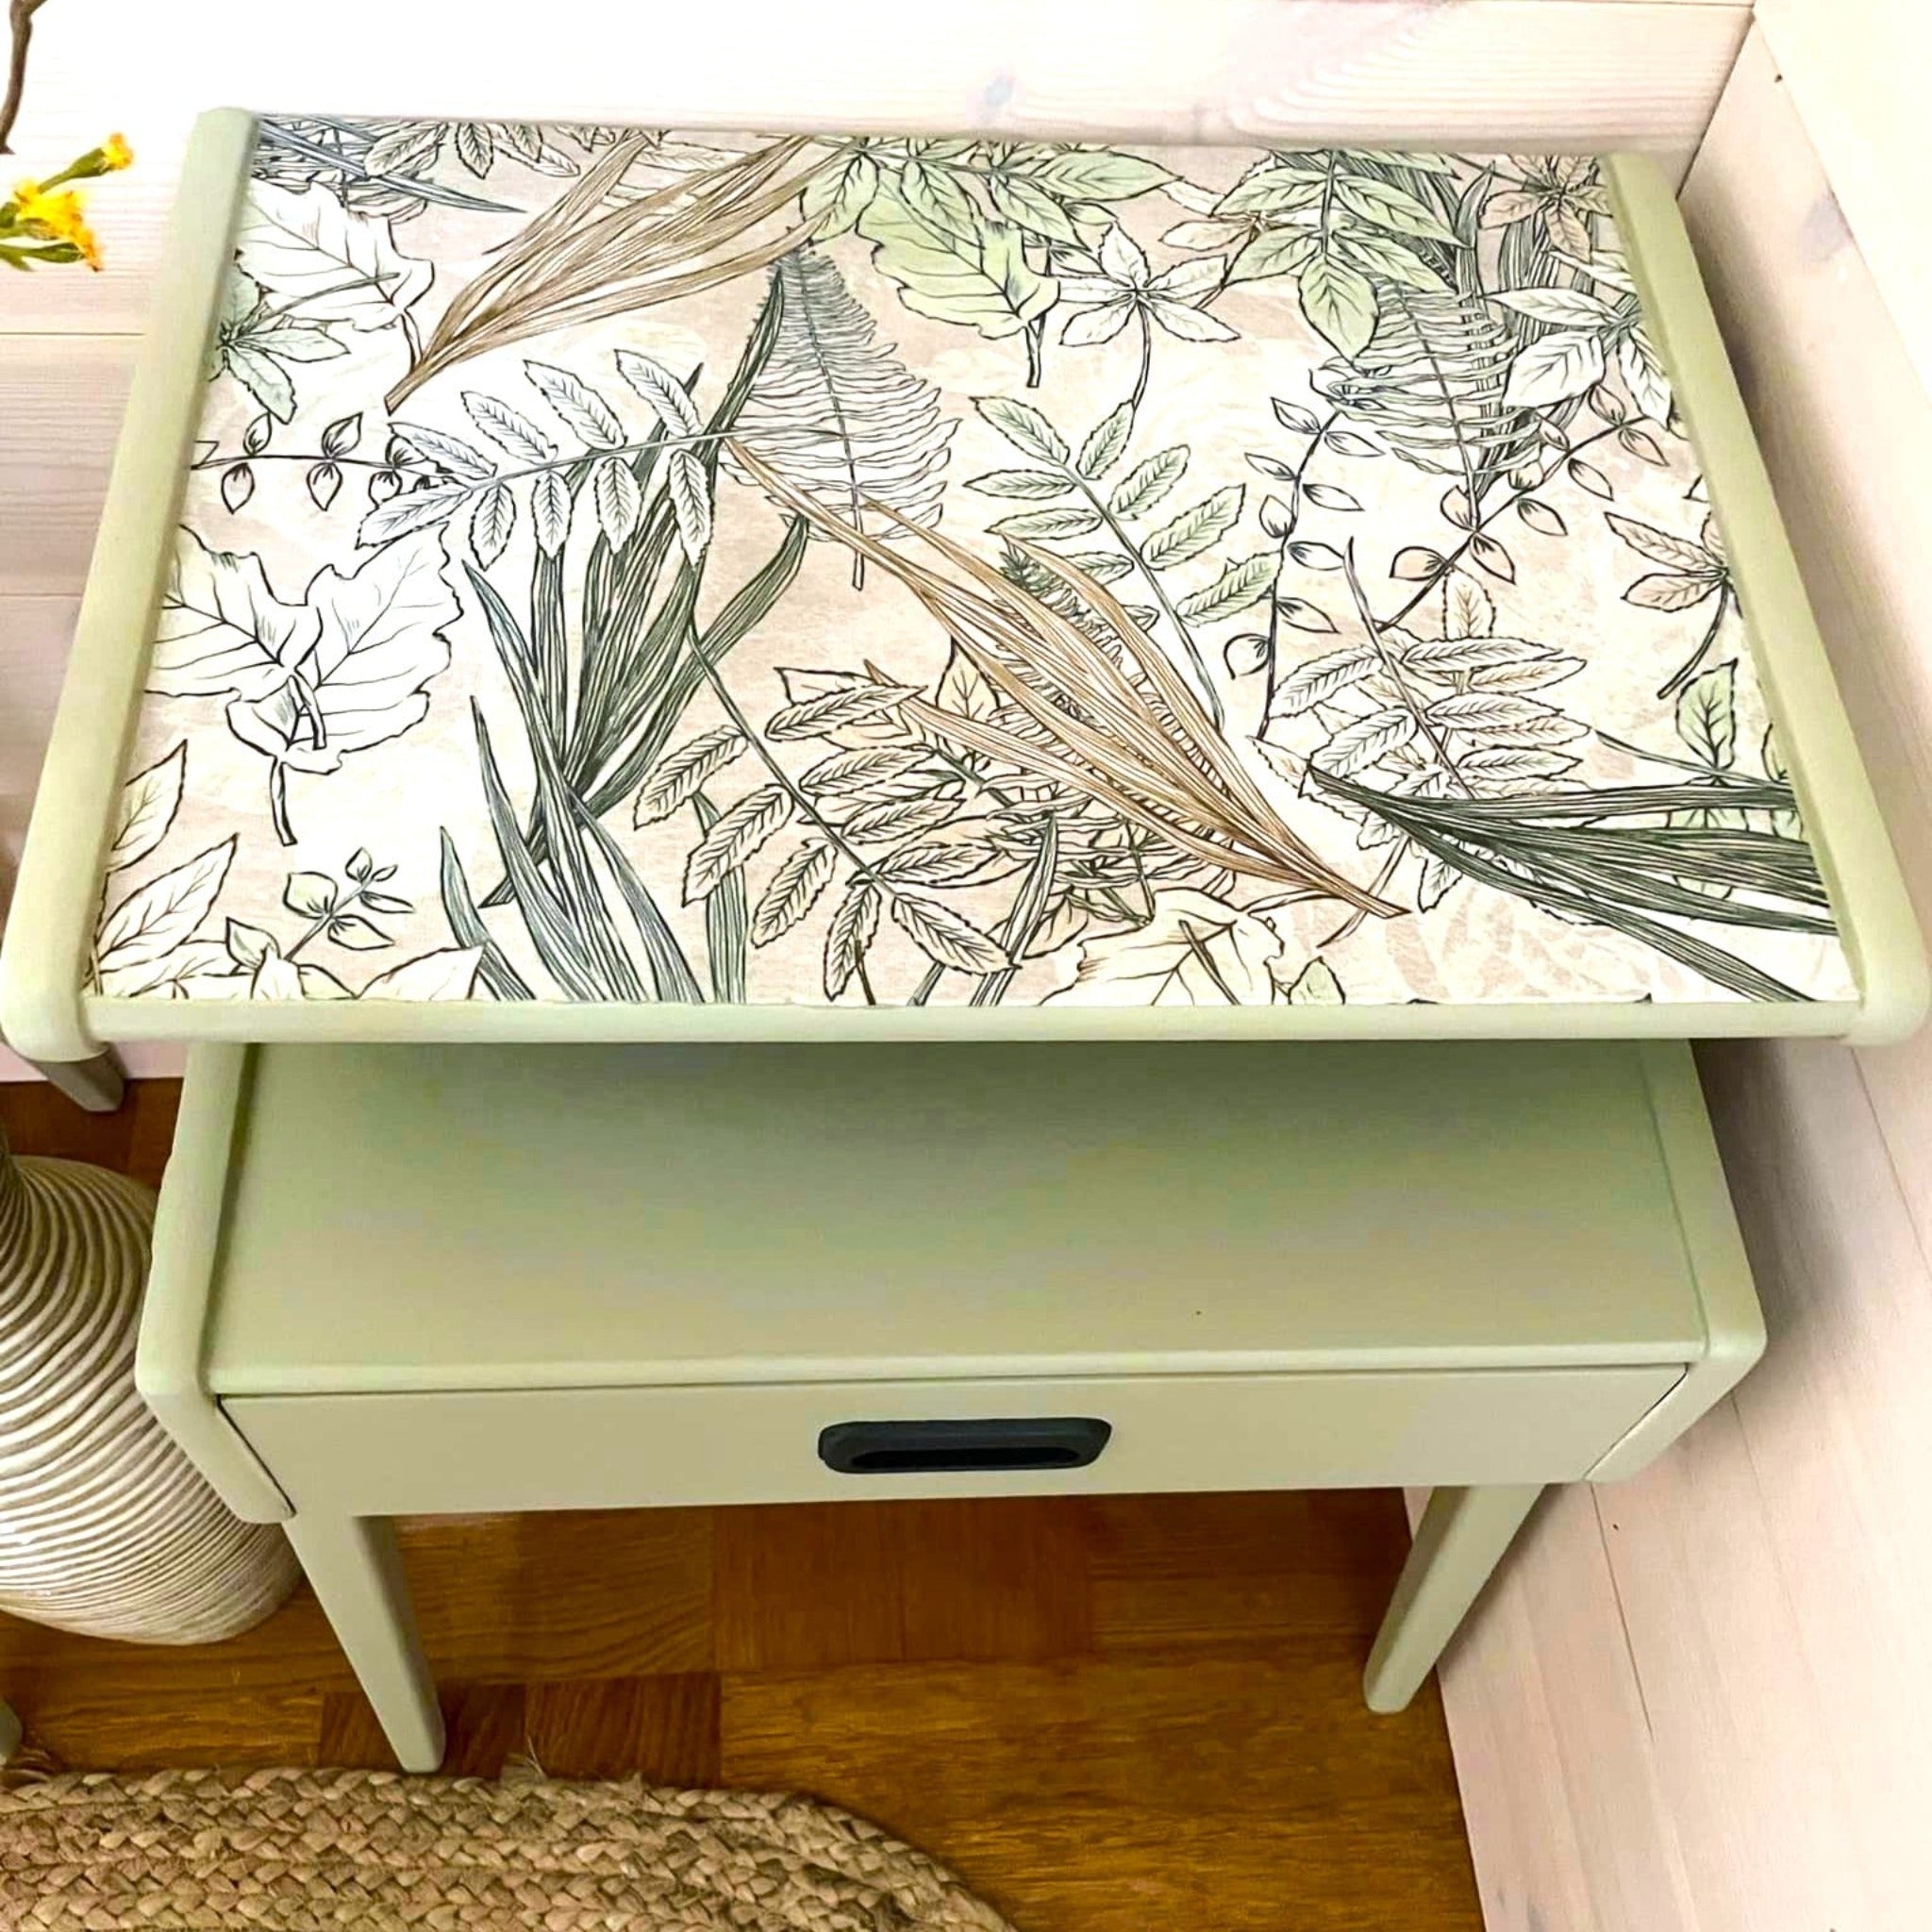 A vintage side table refurbished by Izmayanie Yahaya is painted Spring green and features ReDesign with Prima's Tranquil Autumn tissue paper on its top shelf.